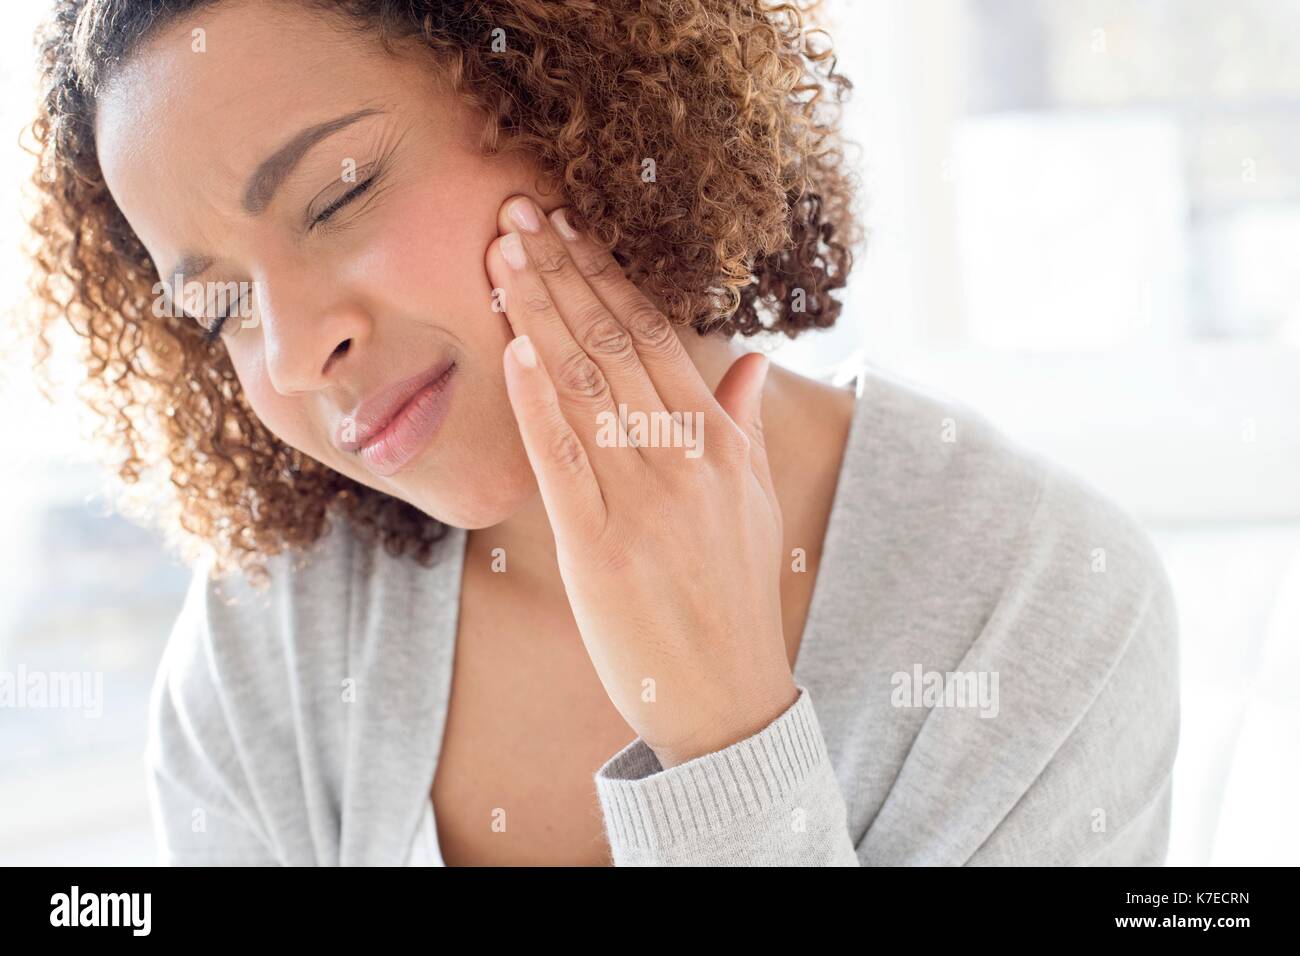 Portrait of mid adult woman touching face. Stock Photo